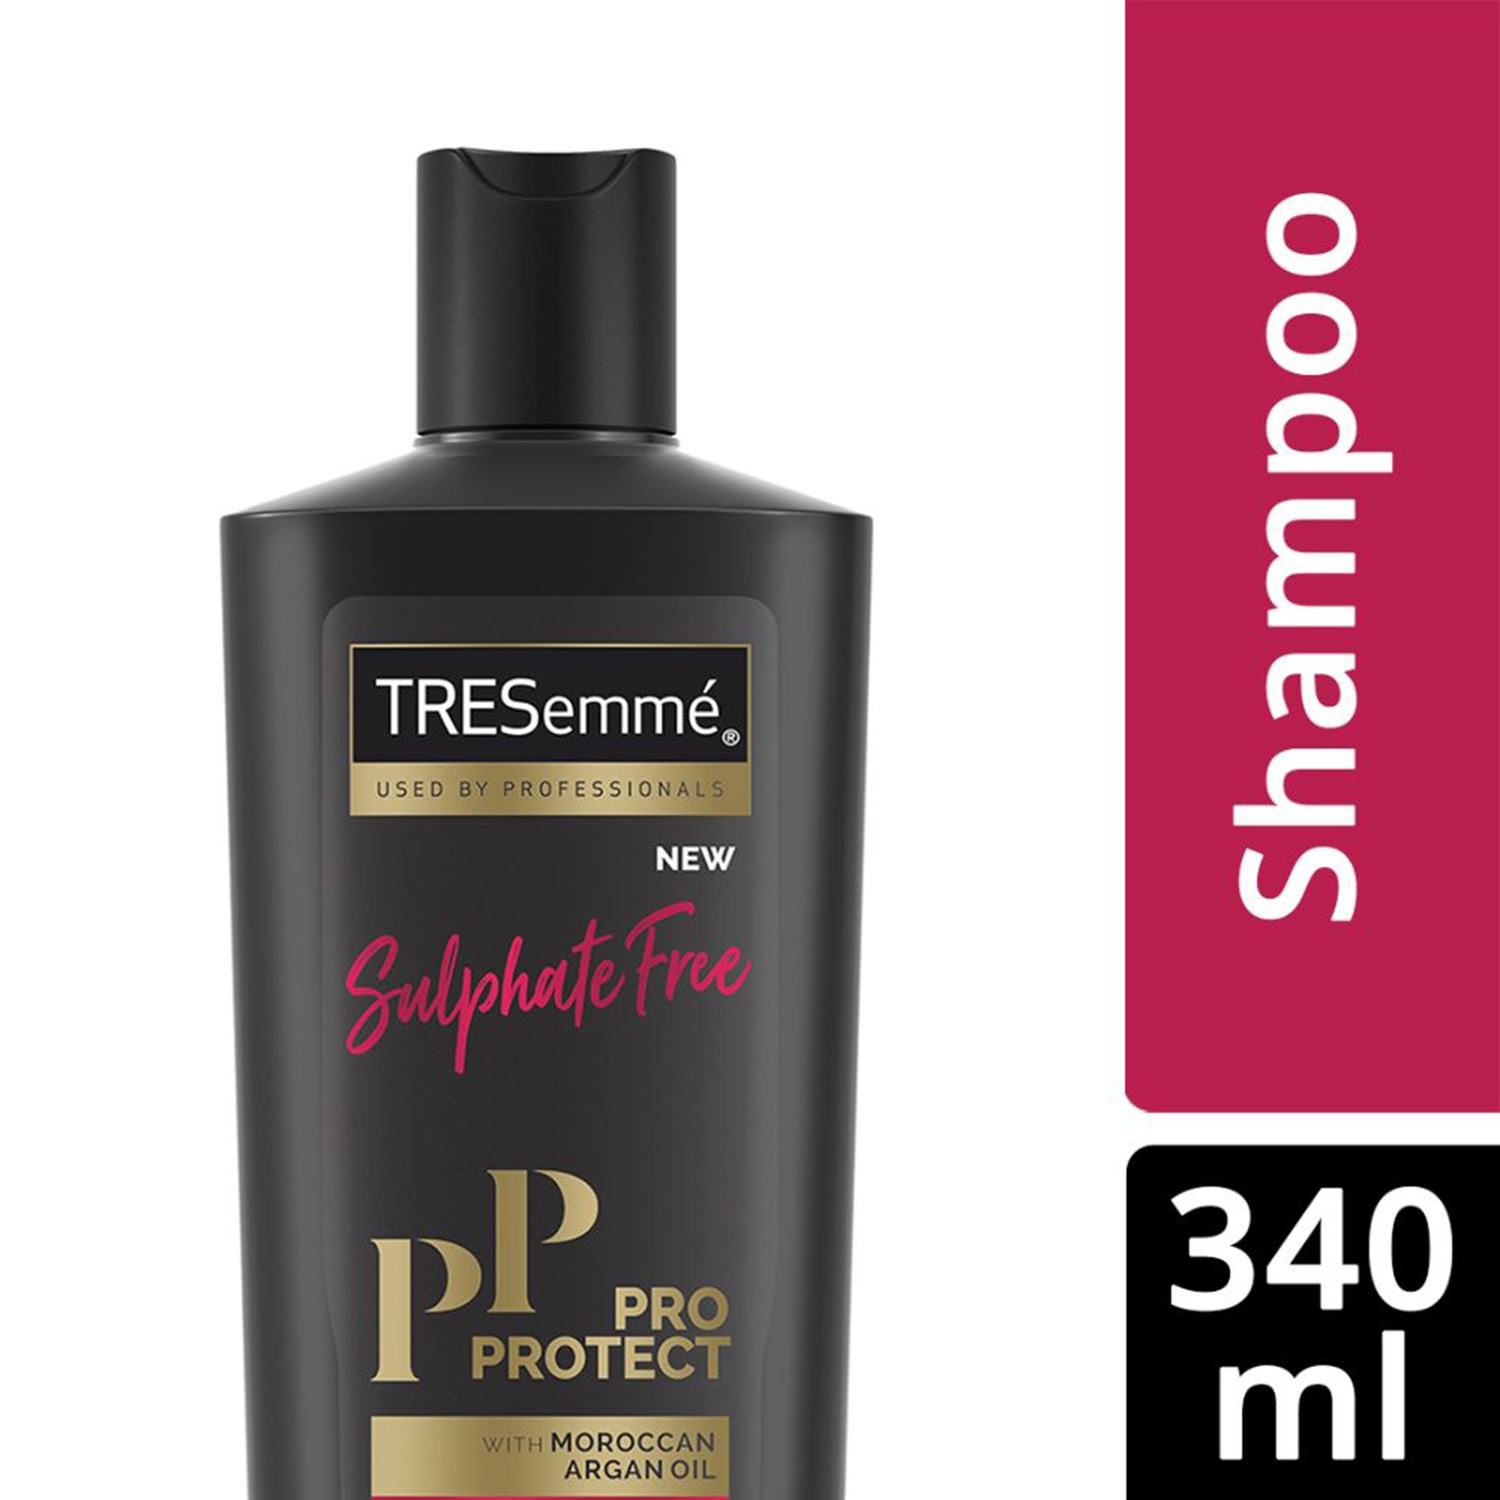 Tresemme | Tresemme Pro Protect Sulphate Free Shampoo - (340ml)